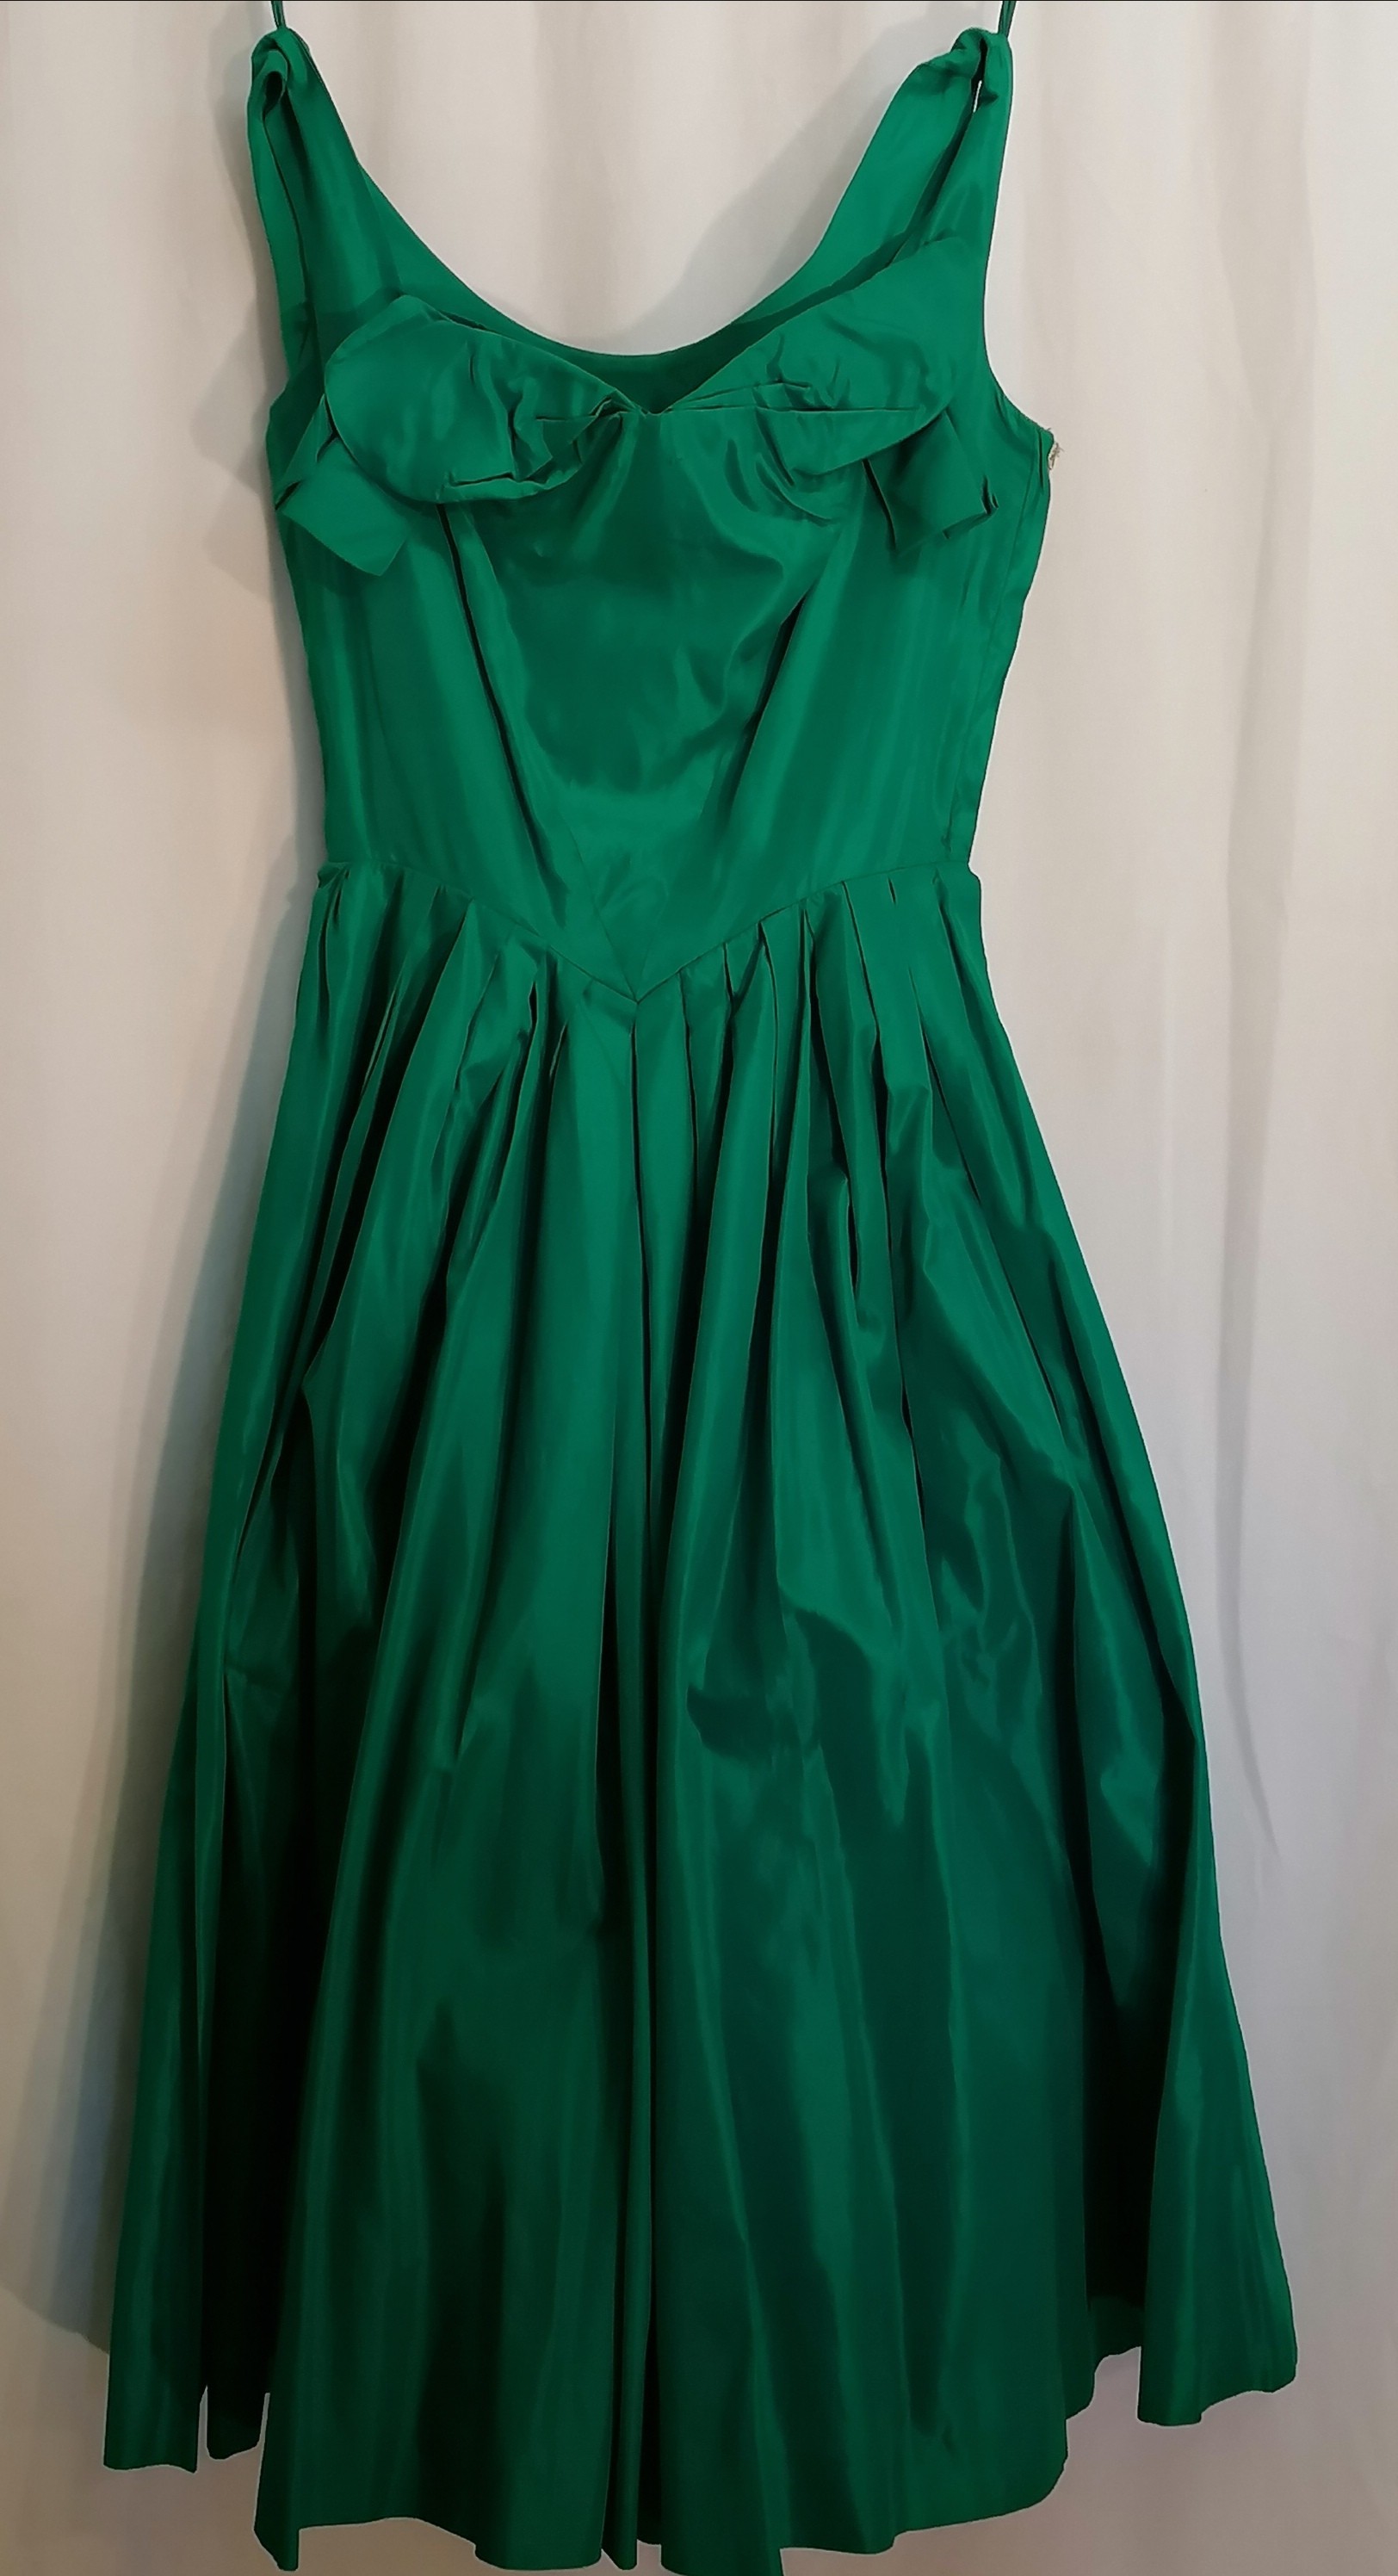 1950's Green silk evening dress by Rembrandt. In good used condition